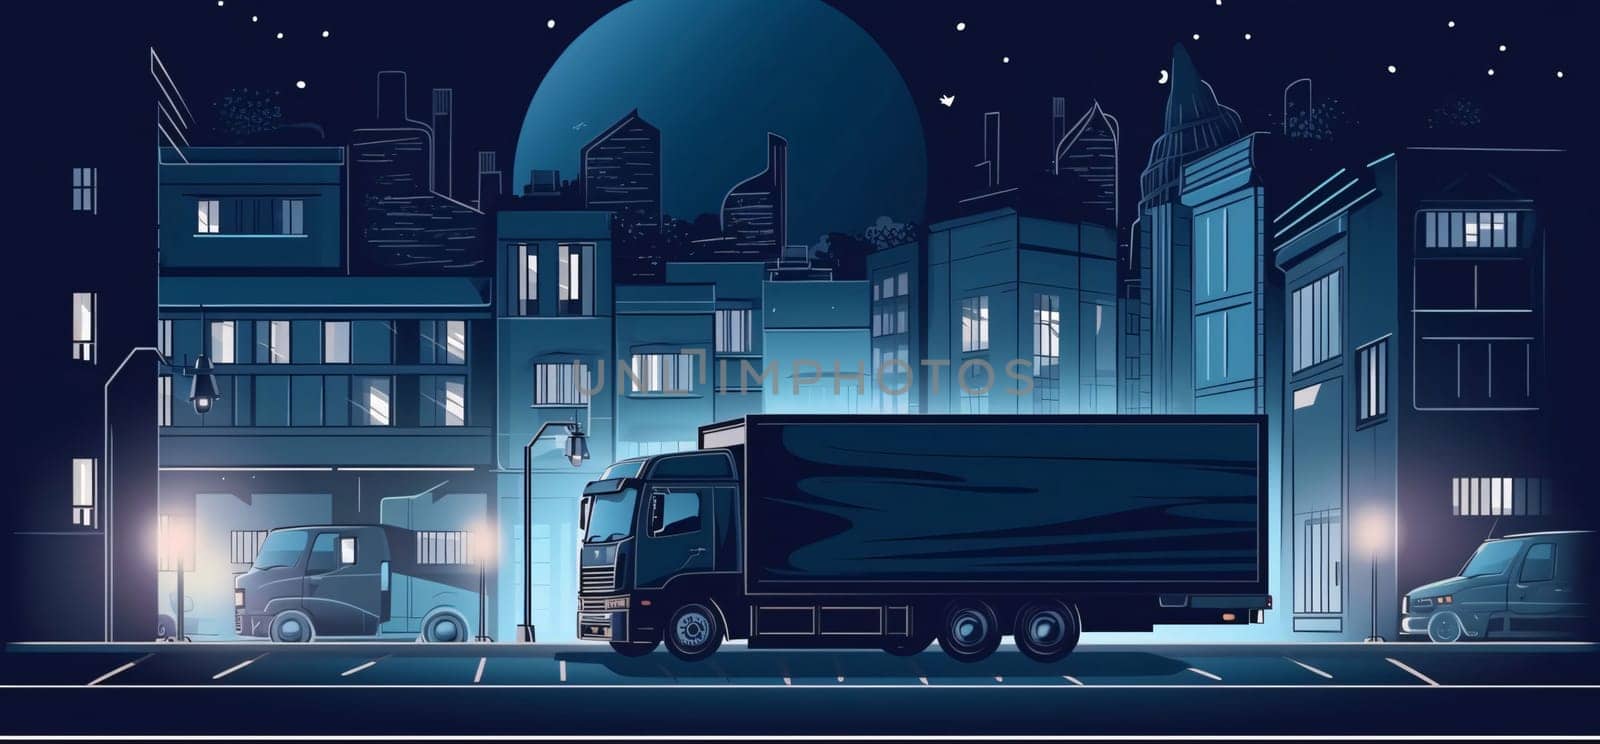 Banner: Truck on the road at night. Vector illustration of the city.